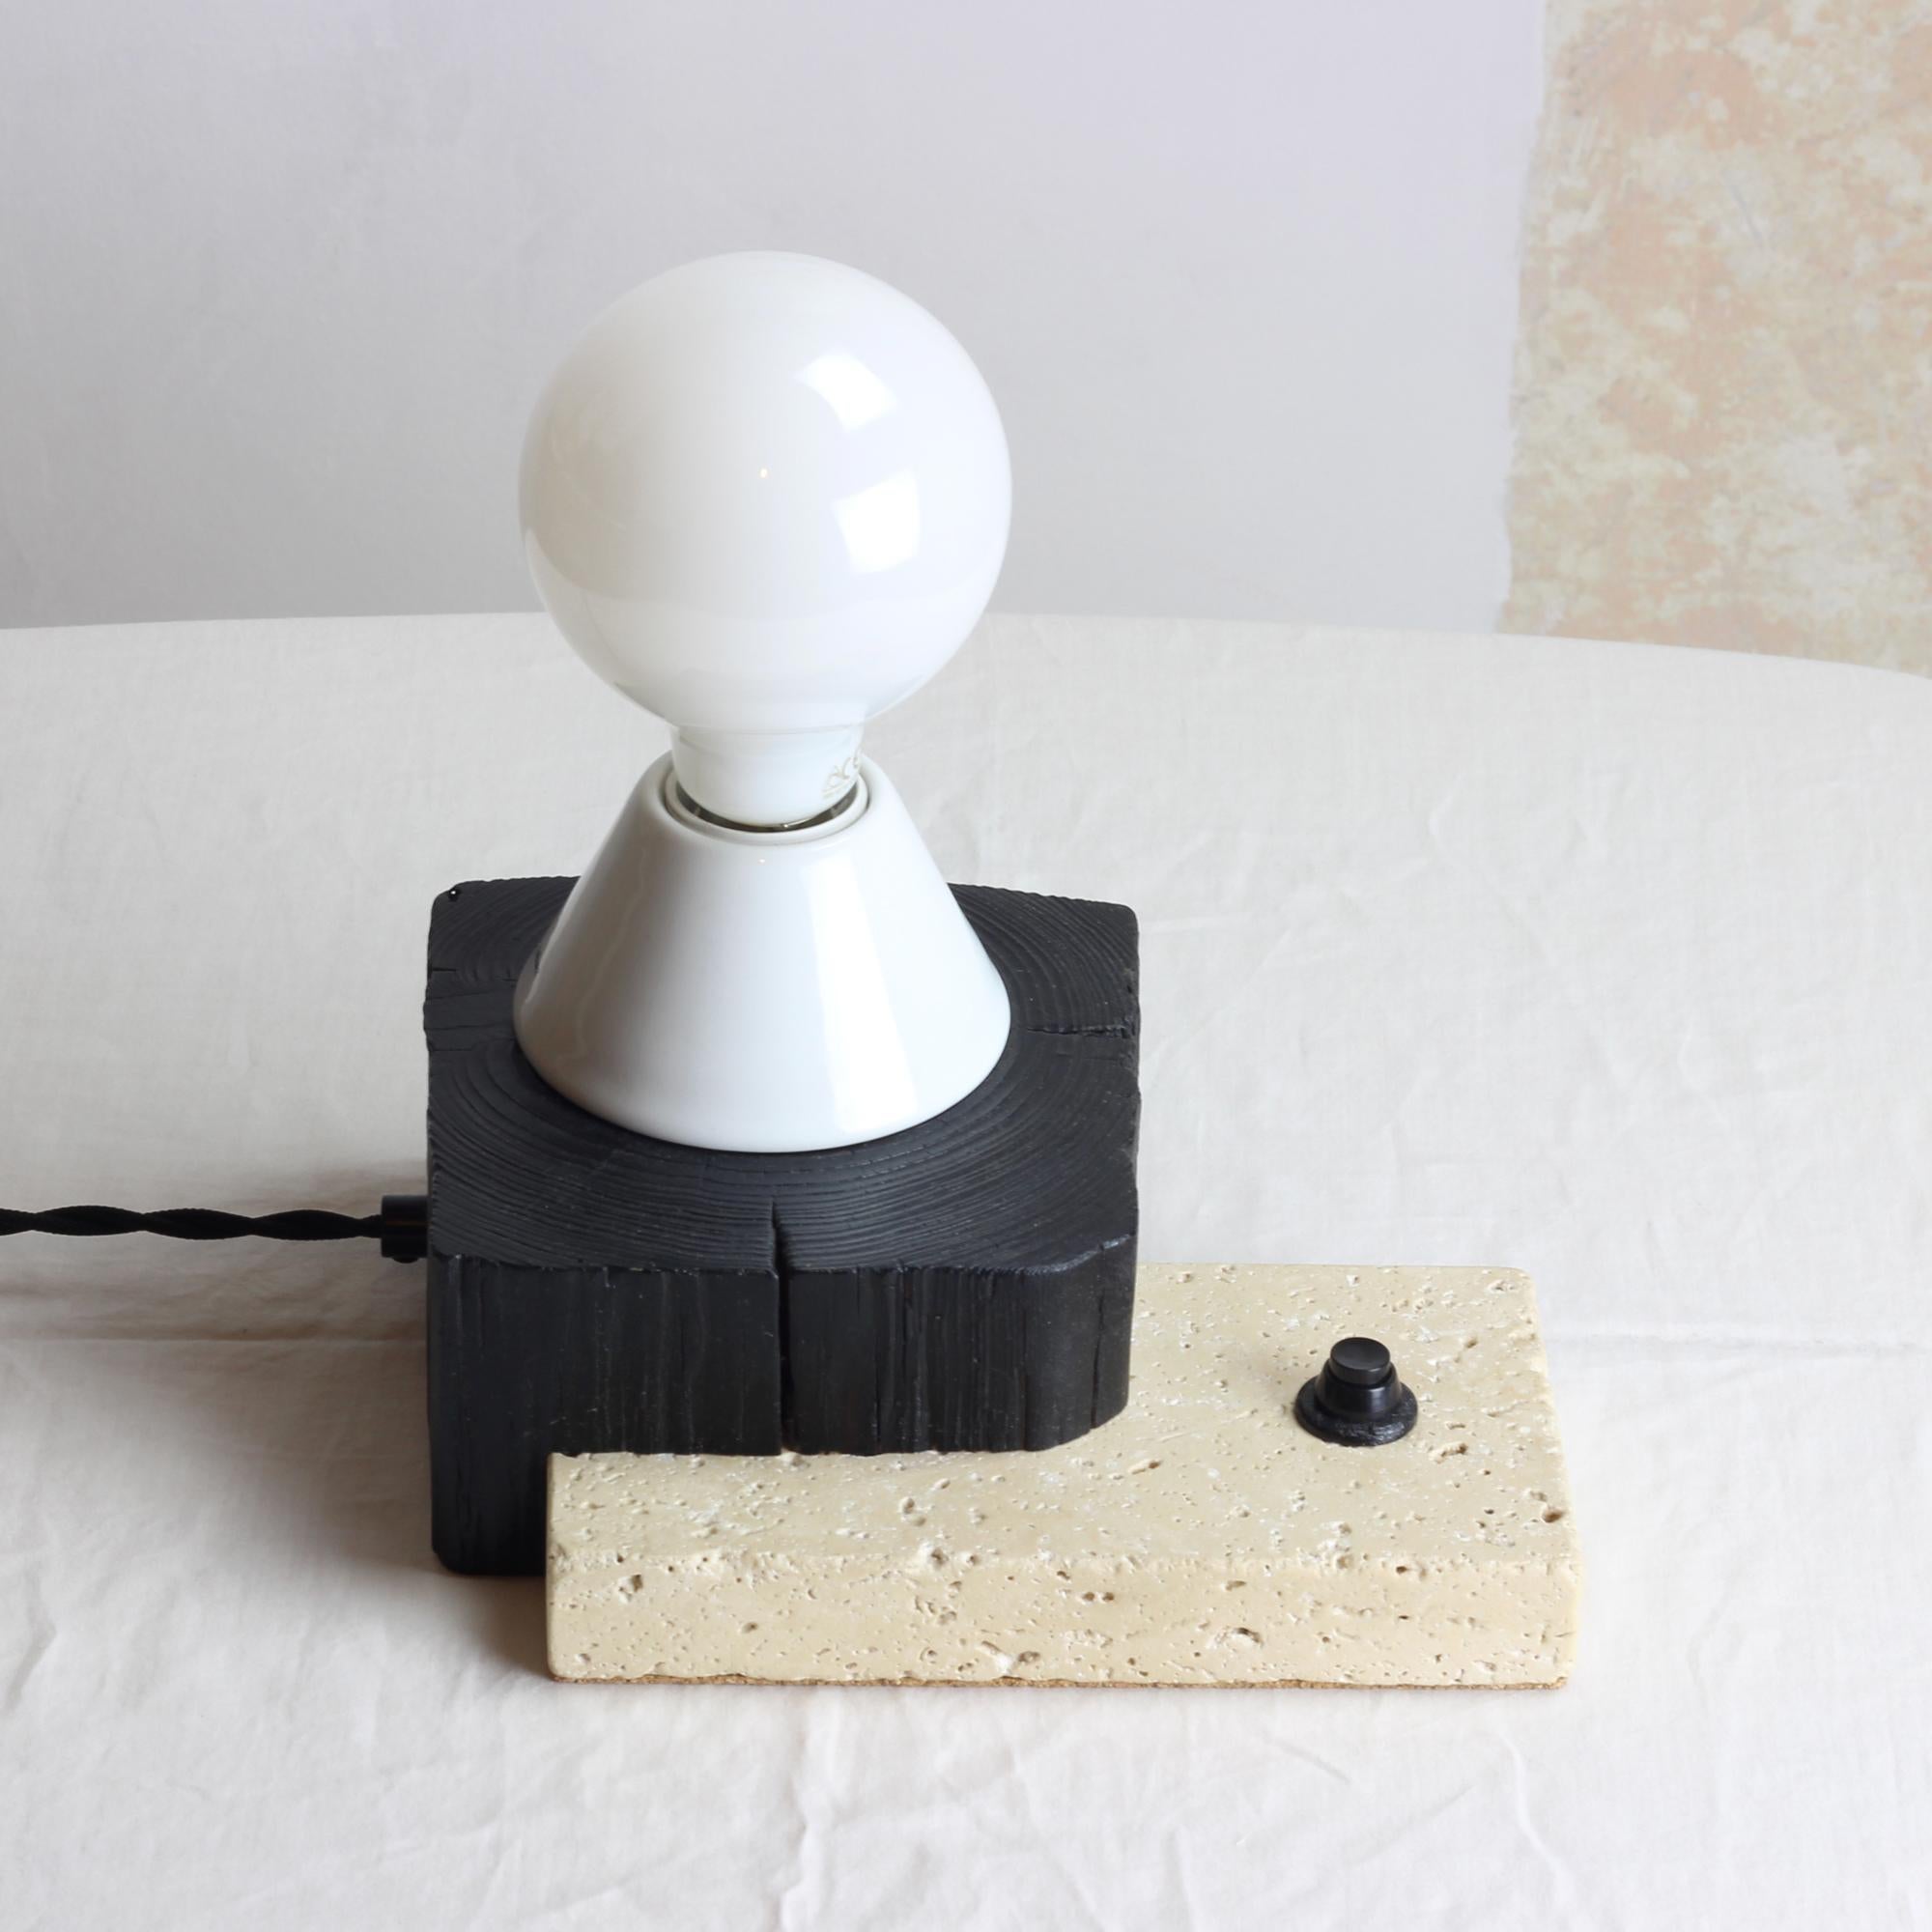 Hungarian Block, Sculptured Lighting, Table Lamp from Reclaimed Burned Wood and Stone For Sale